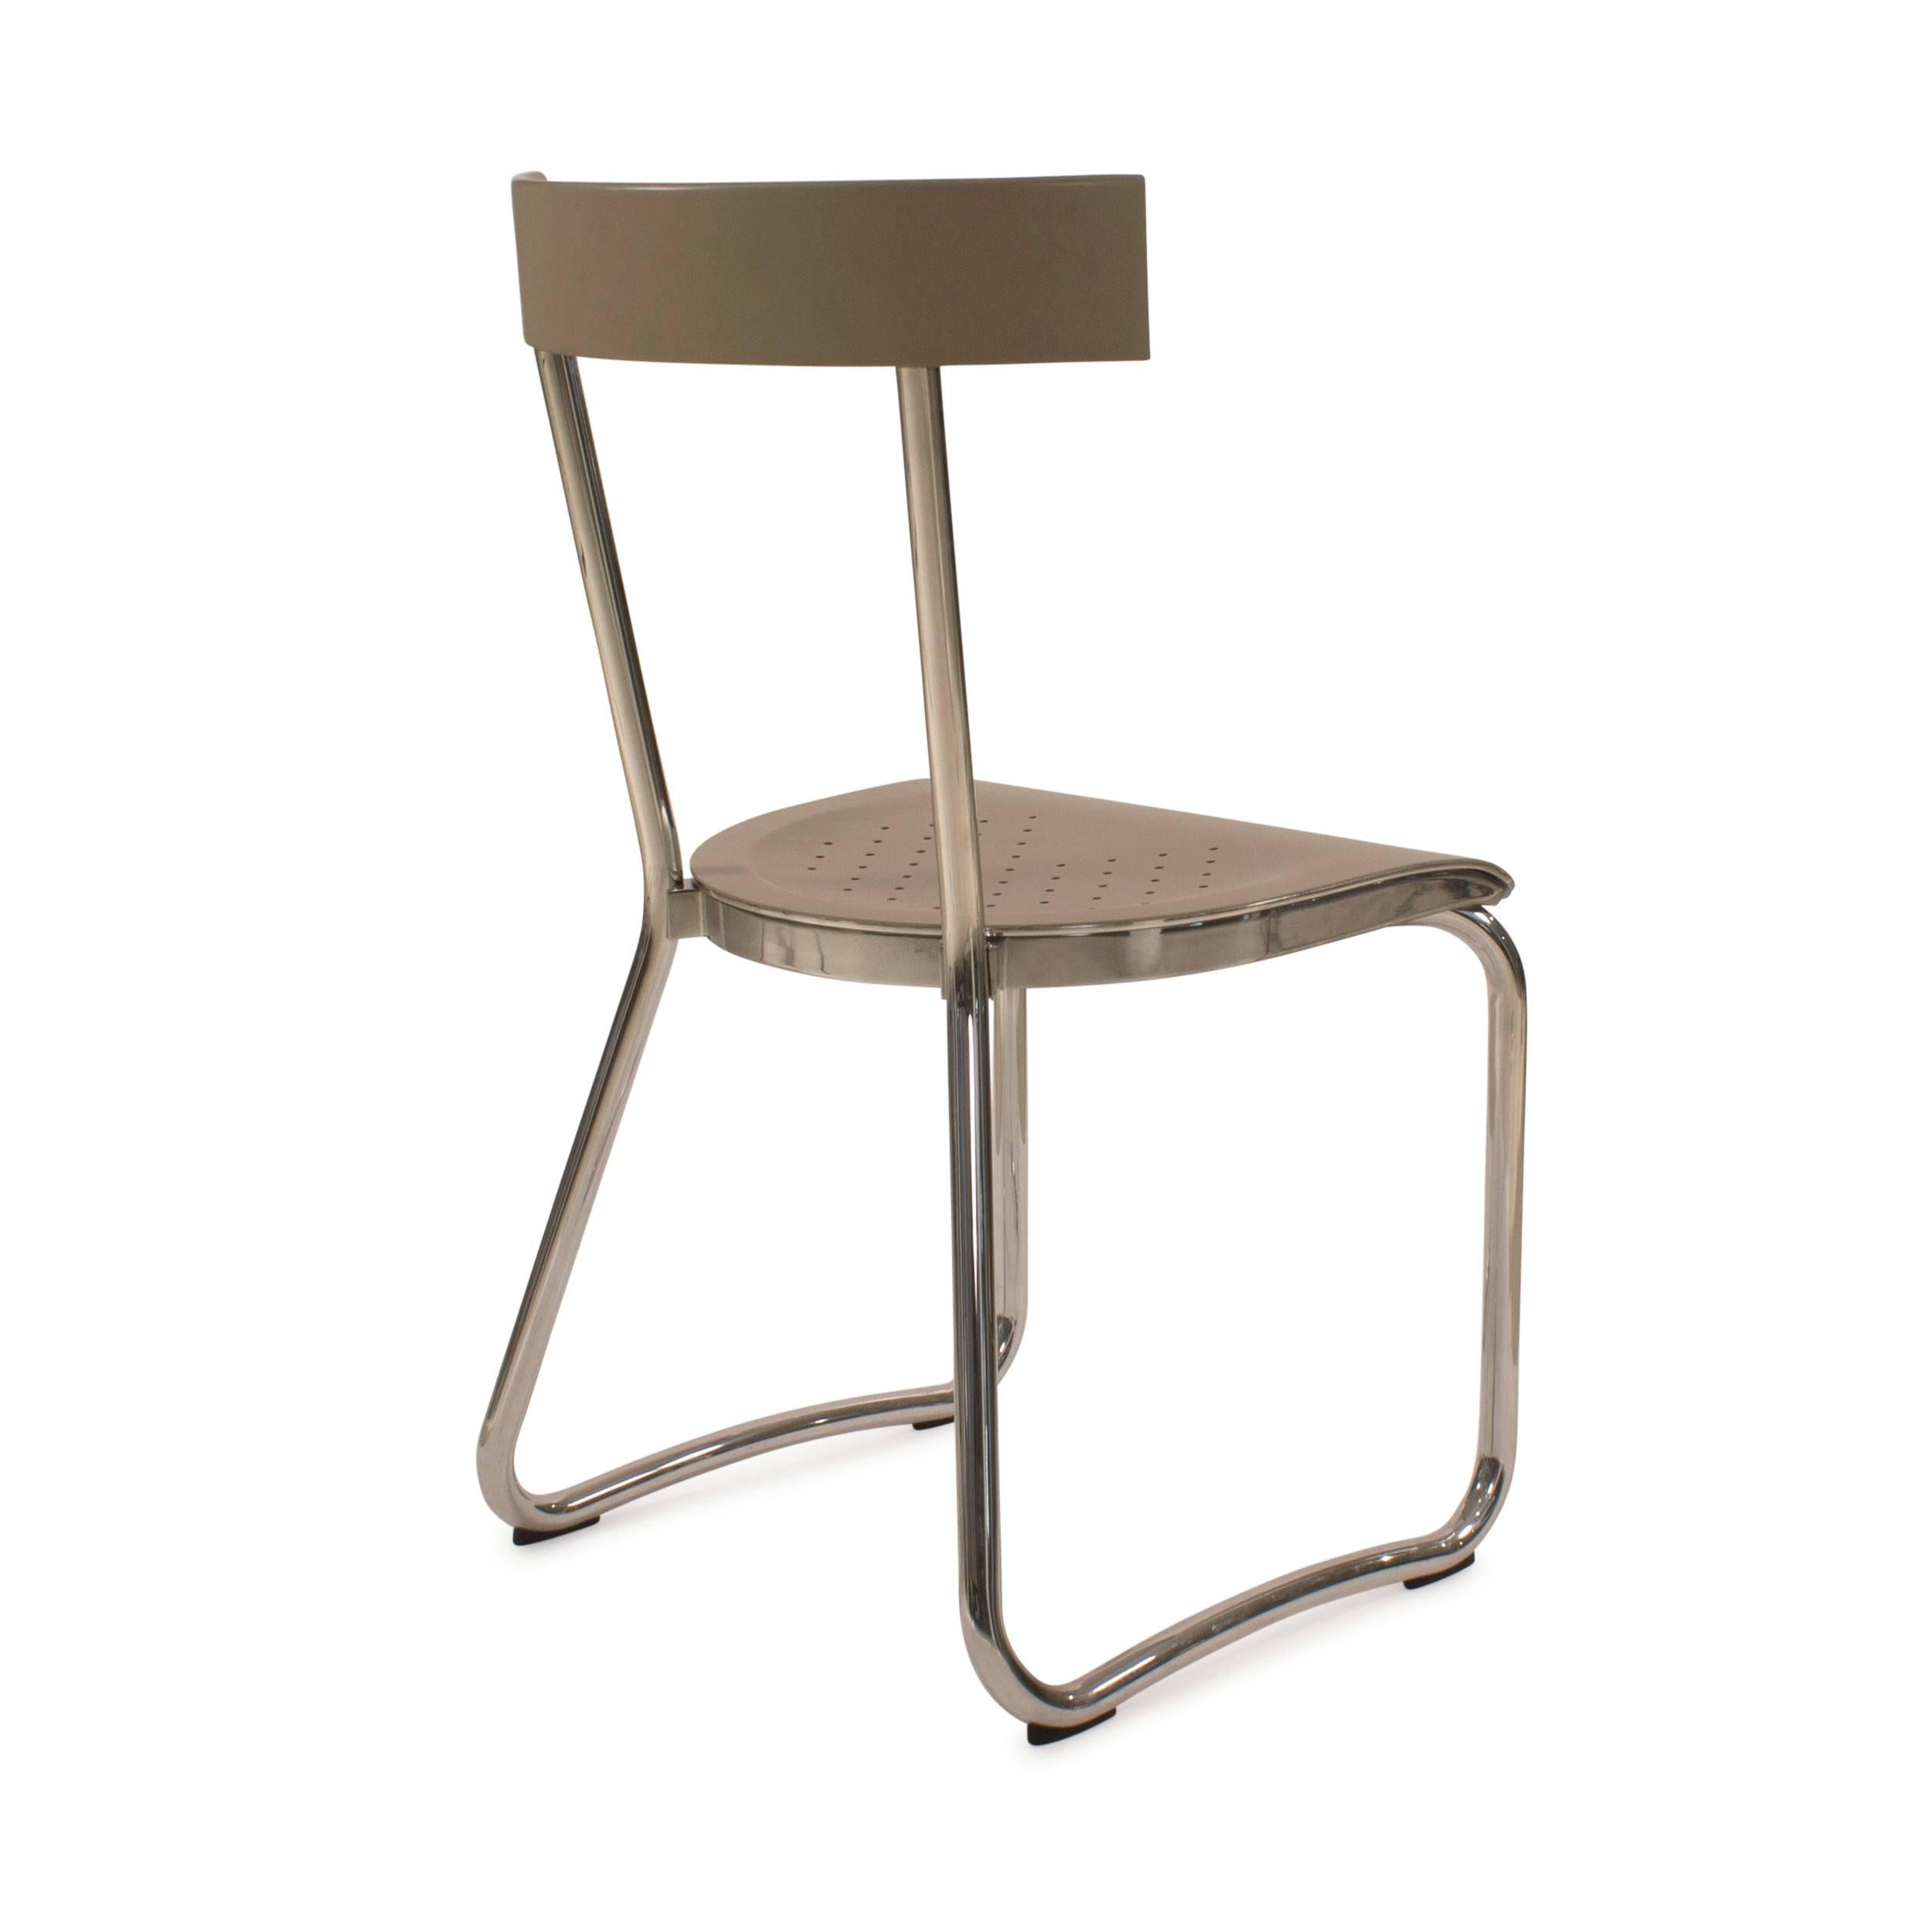 Italian Chrome and Leather Montecatini Dining Chair by Gio Ponti for Molteni, Italy For Sale